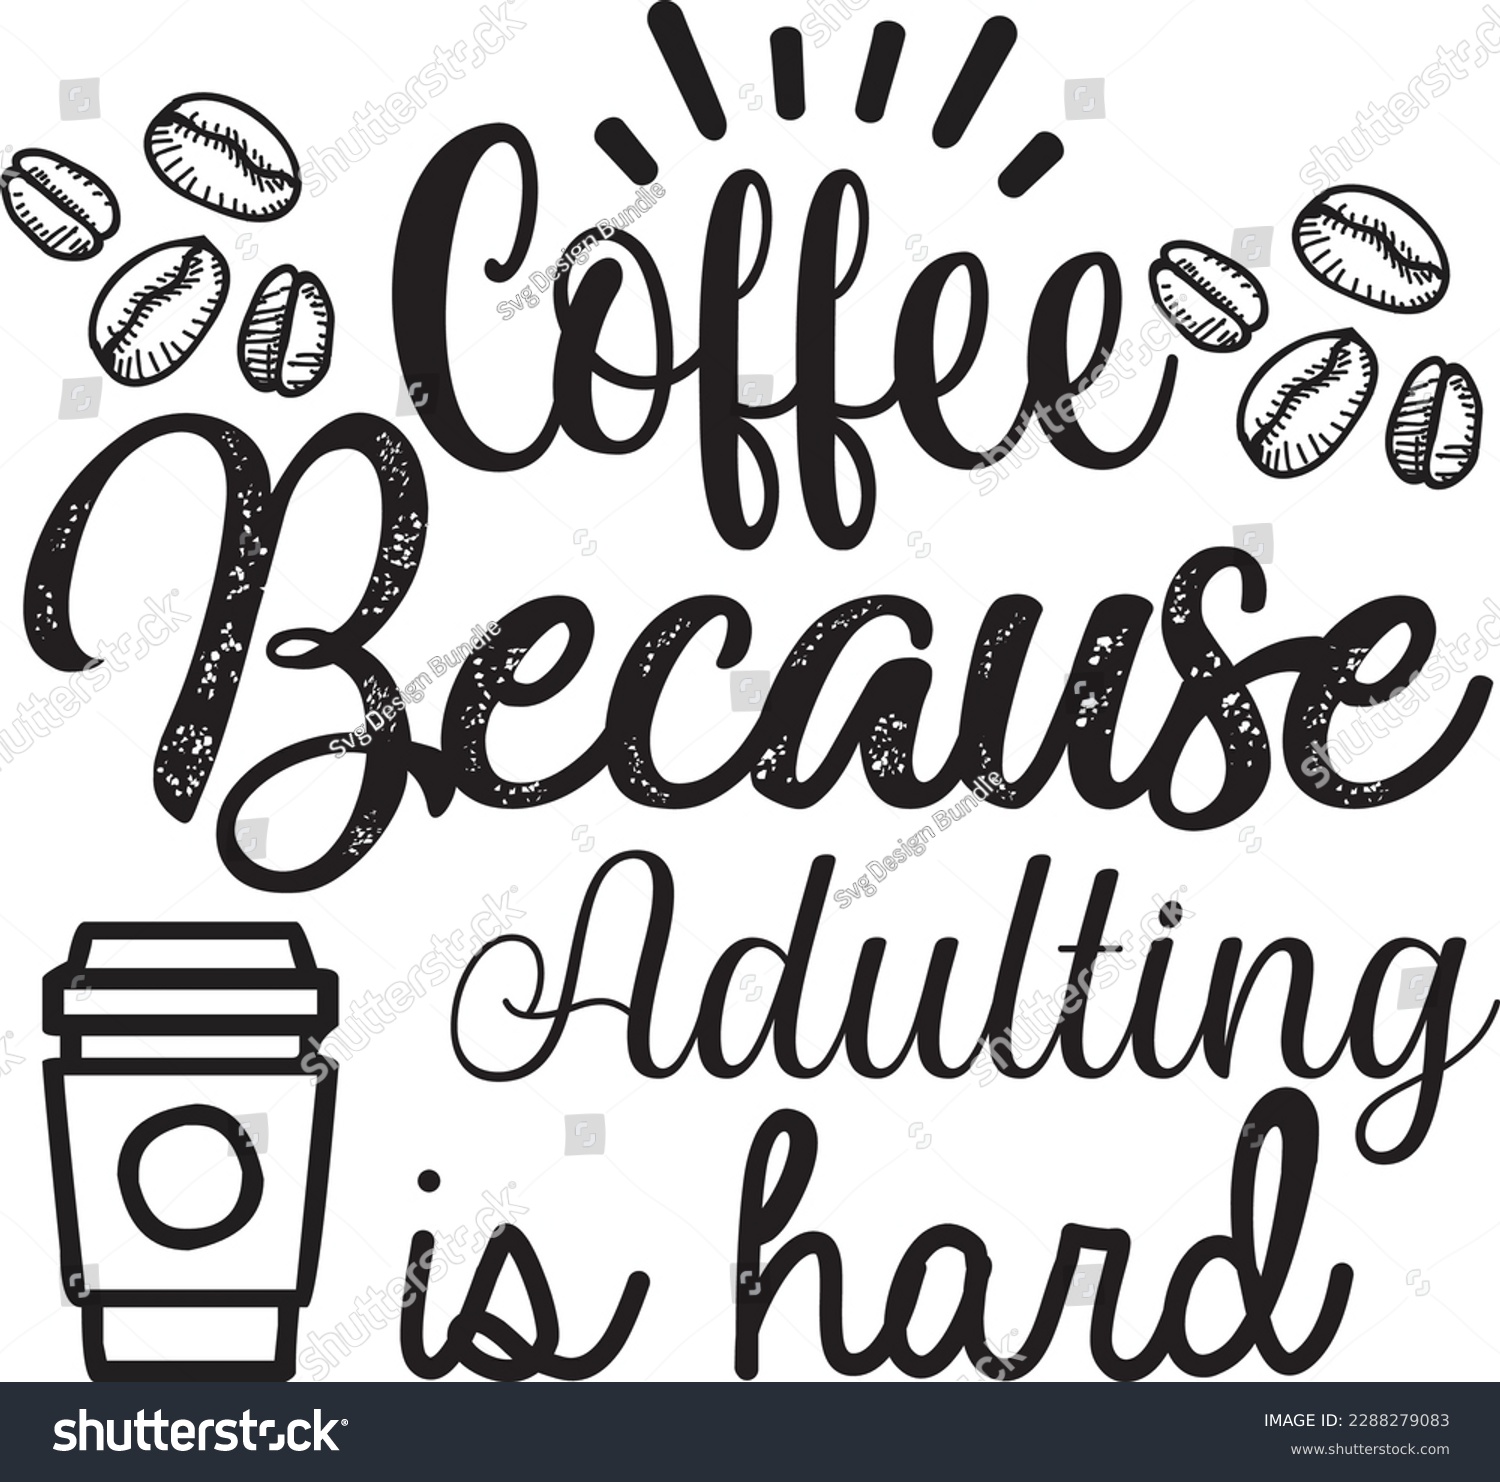 SVG of Coffee because adulting is hard svg ,Coffee svg Design, Coffee svg bundle svg